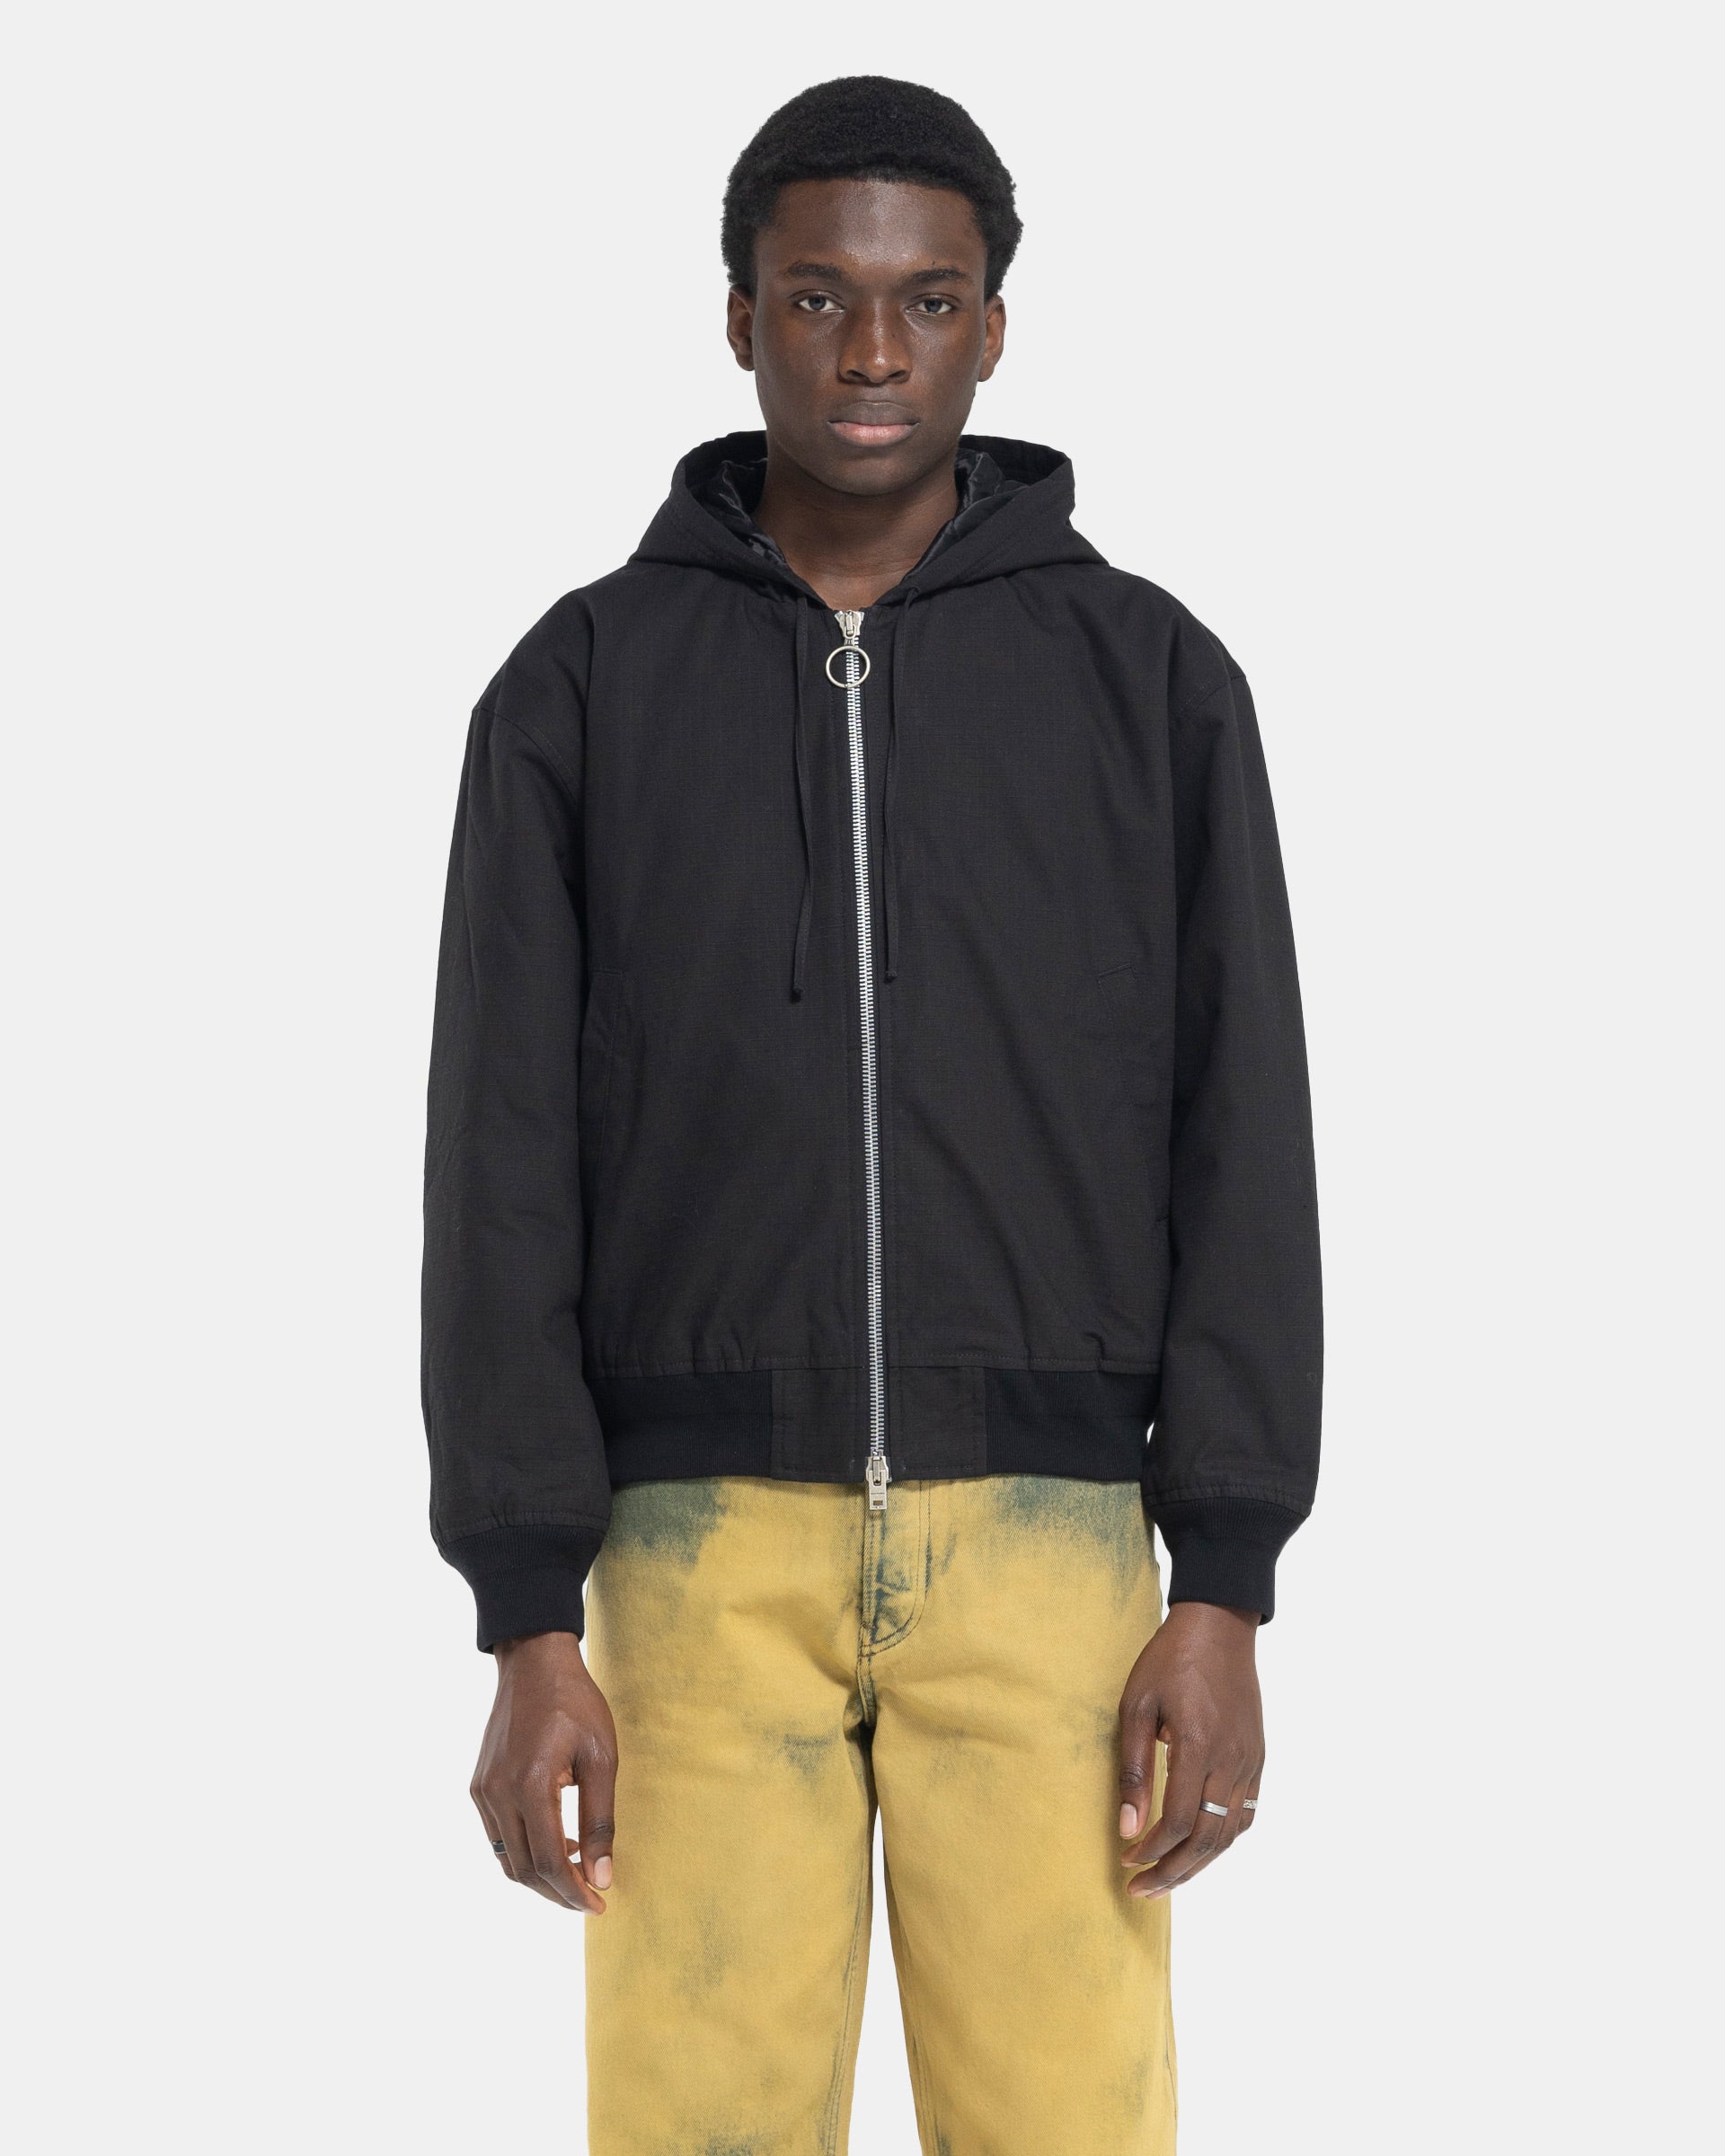 Model wearing Acne Studios Ripstop Padded Jacket in Black on white background